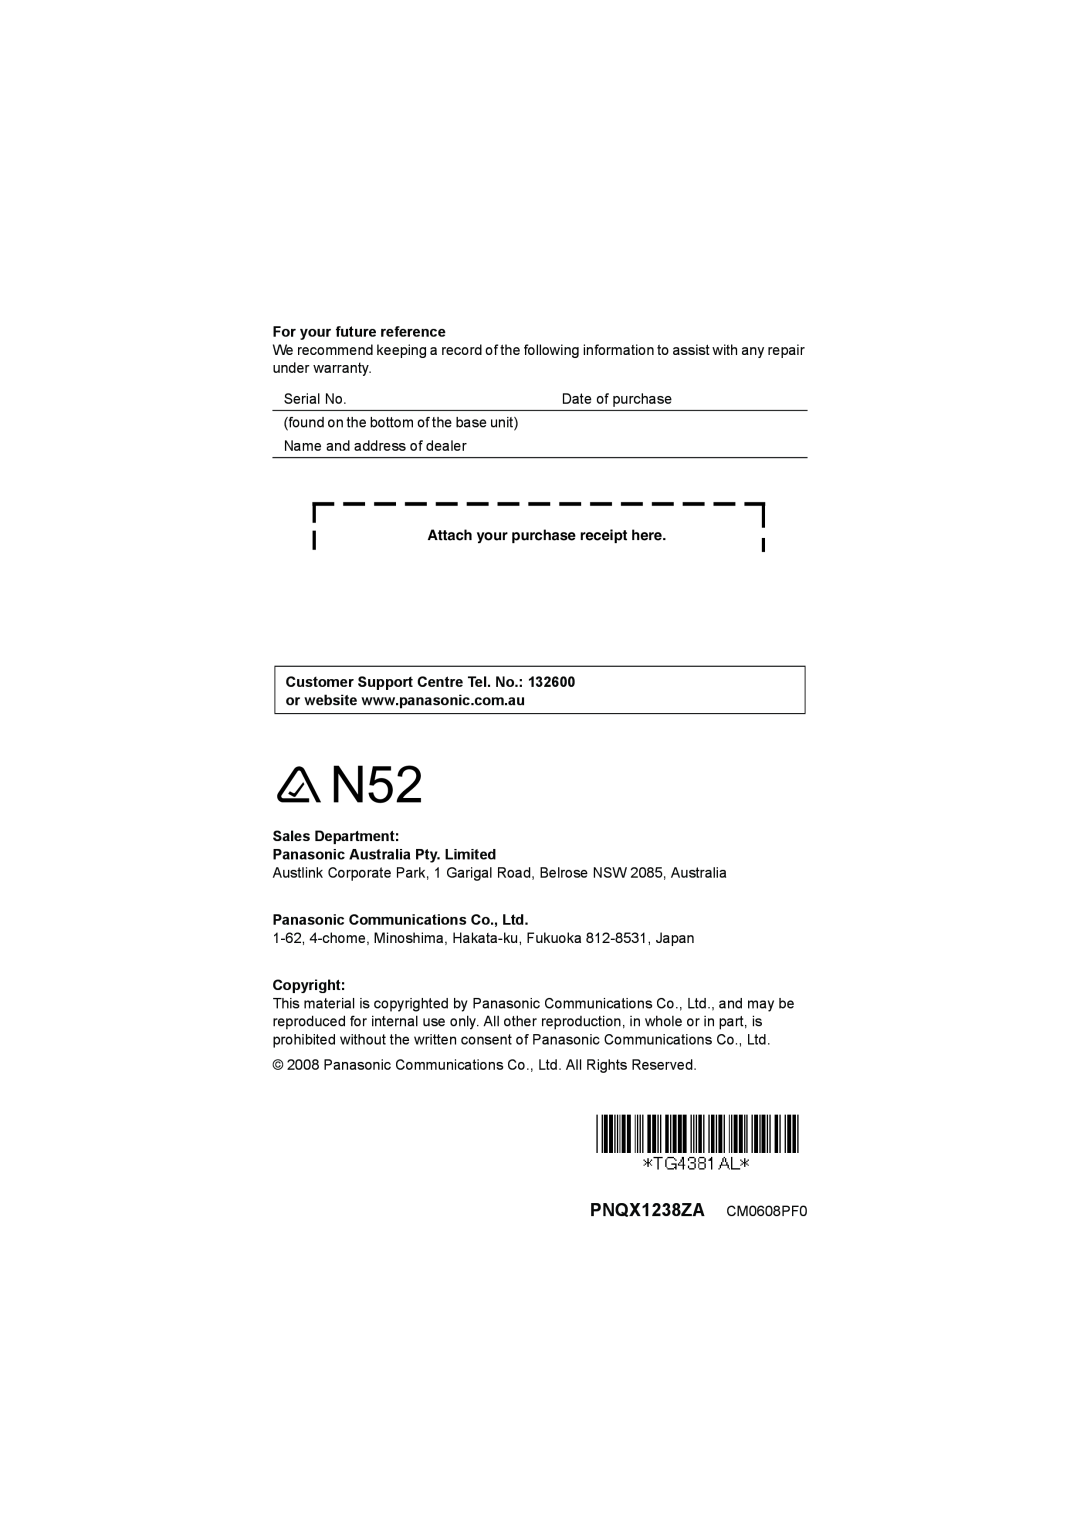 Panasonic KX-TG4381AL PNQX1238ZA CM0608PF0, For your future reference, Attach your purchase receipt here, Copyright 